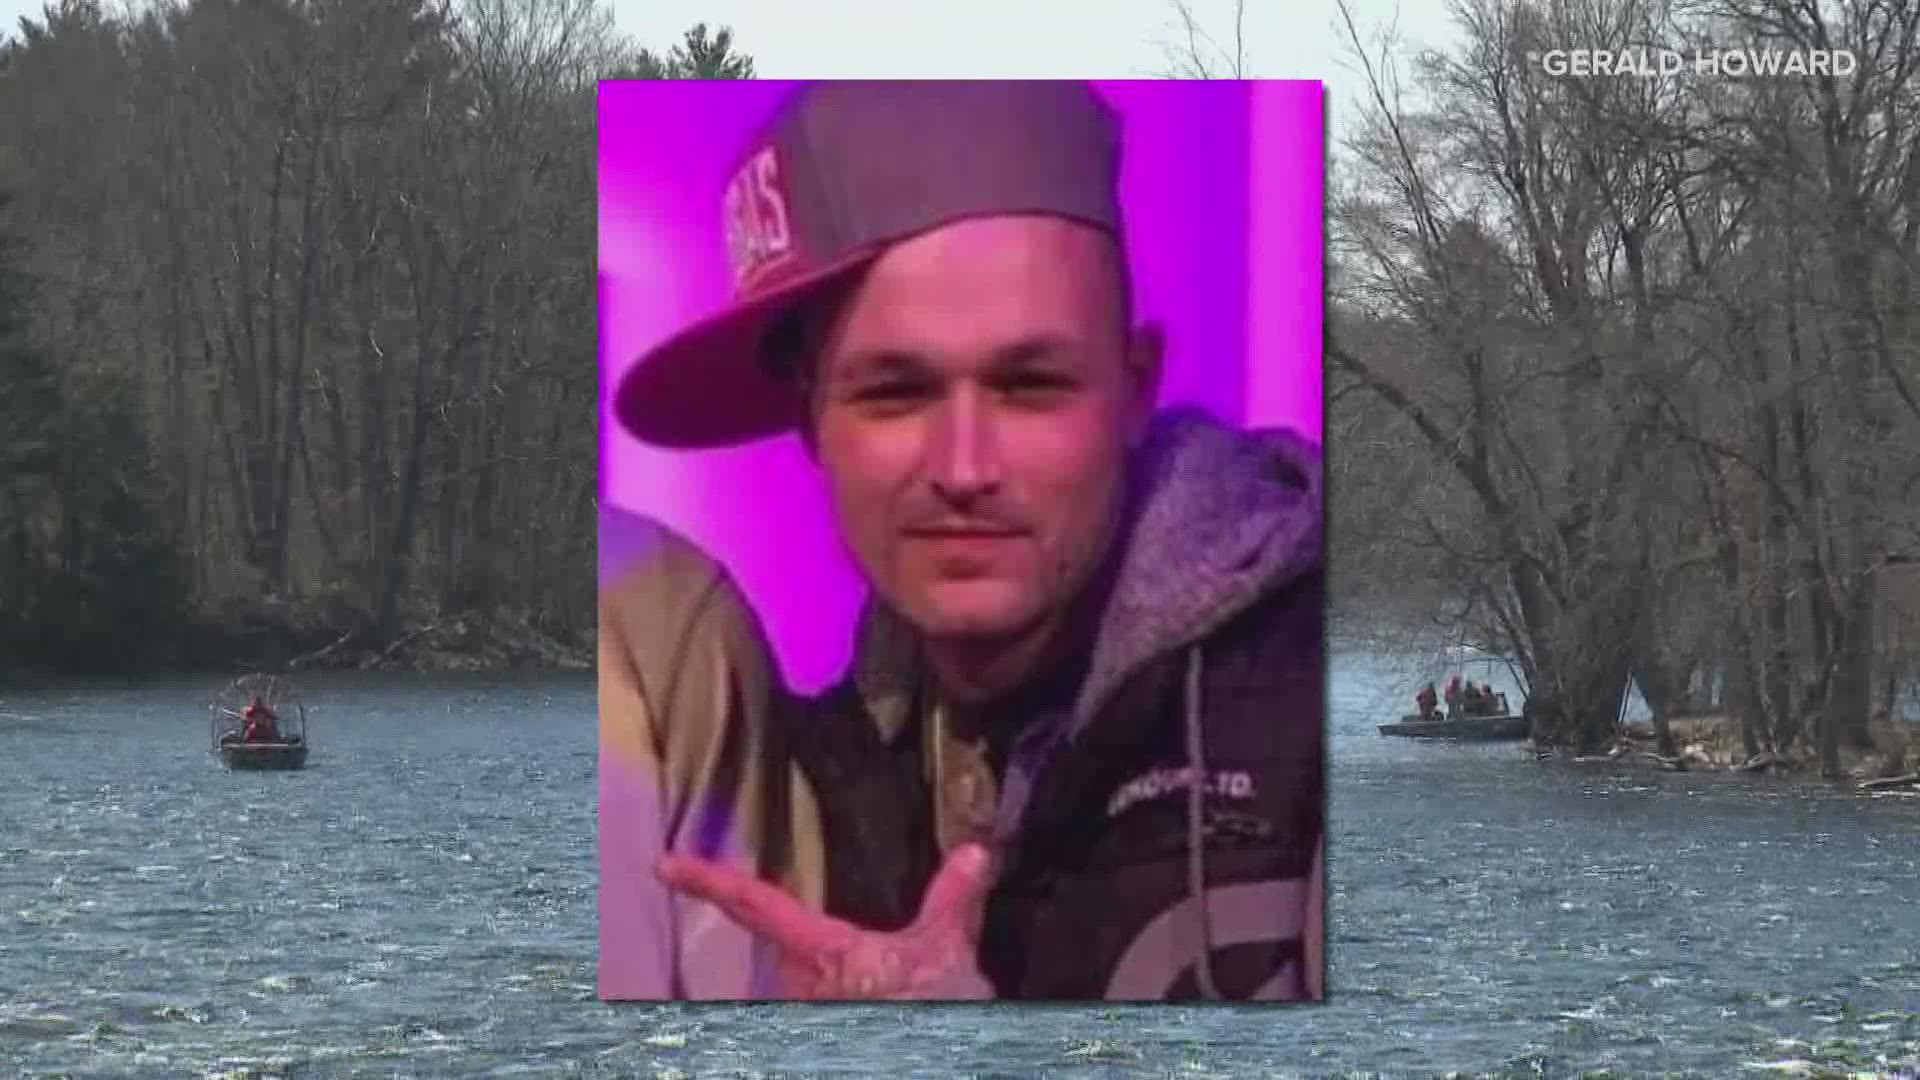 Search scaled back for missing Clinton man